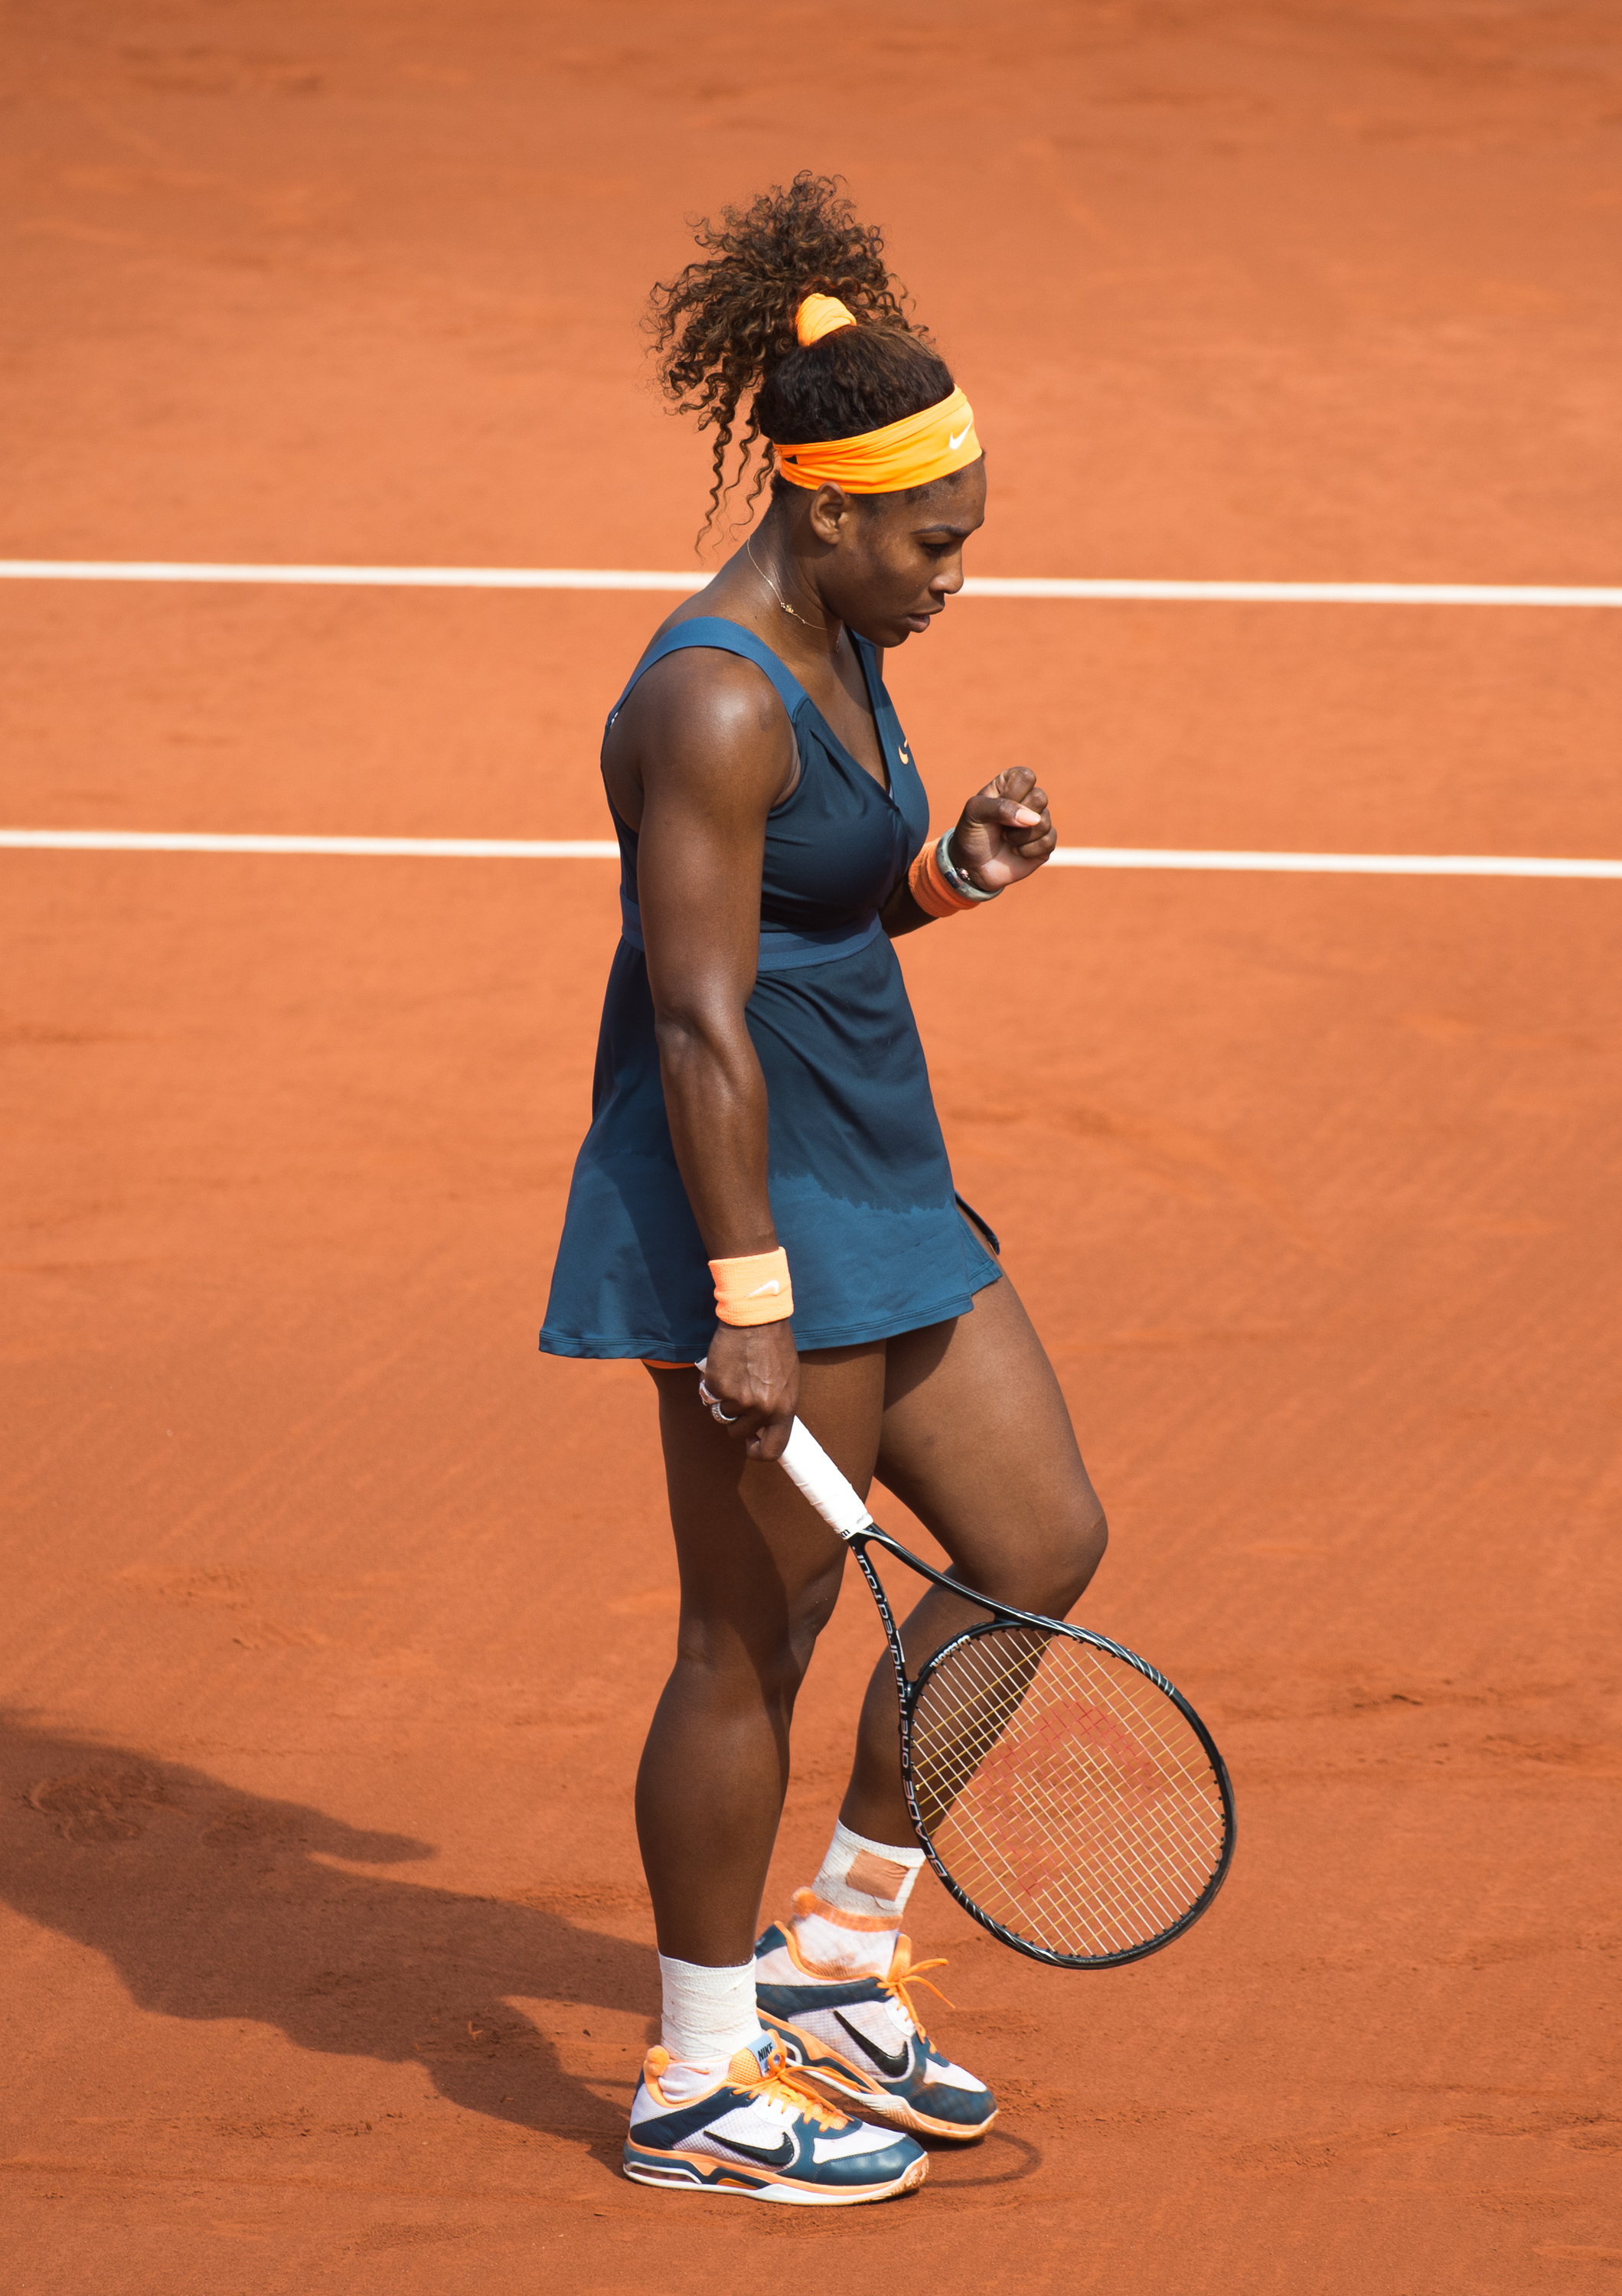 Serena Williams Wins the 2013 French Open in the Nike Air Max Mirabella 3